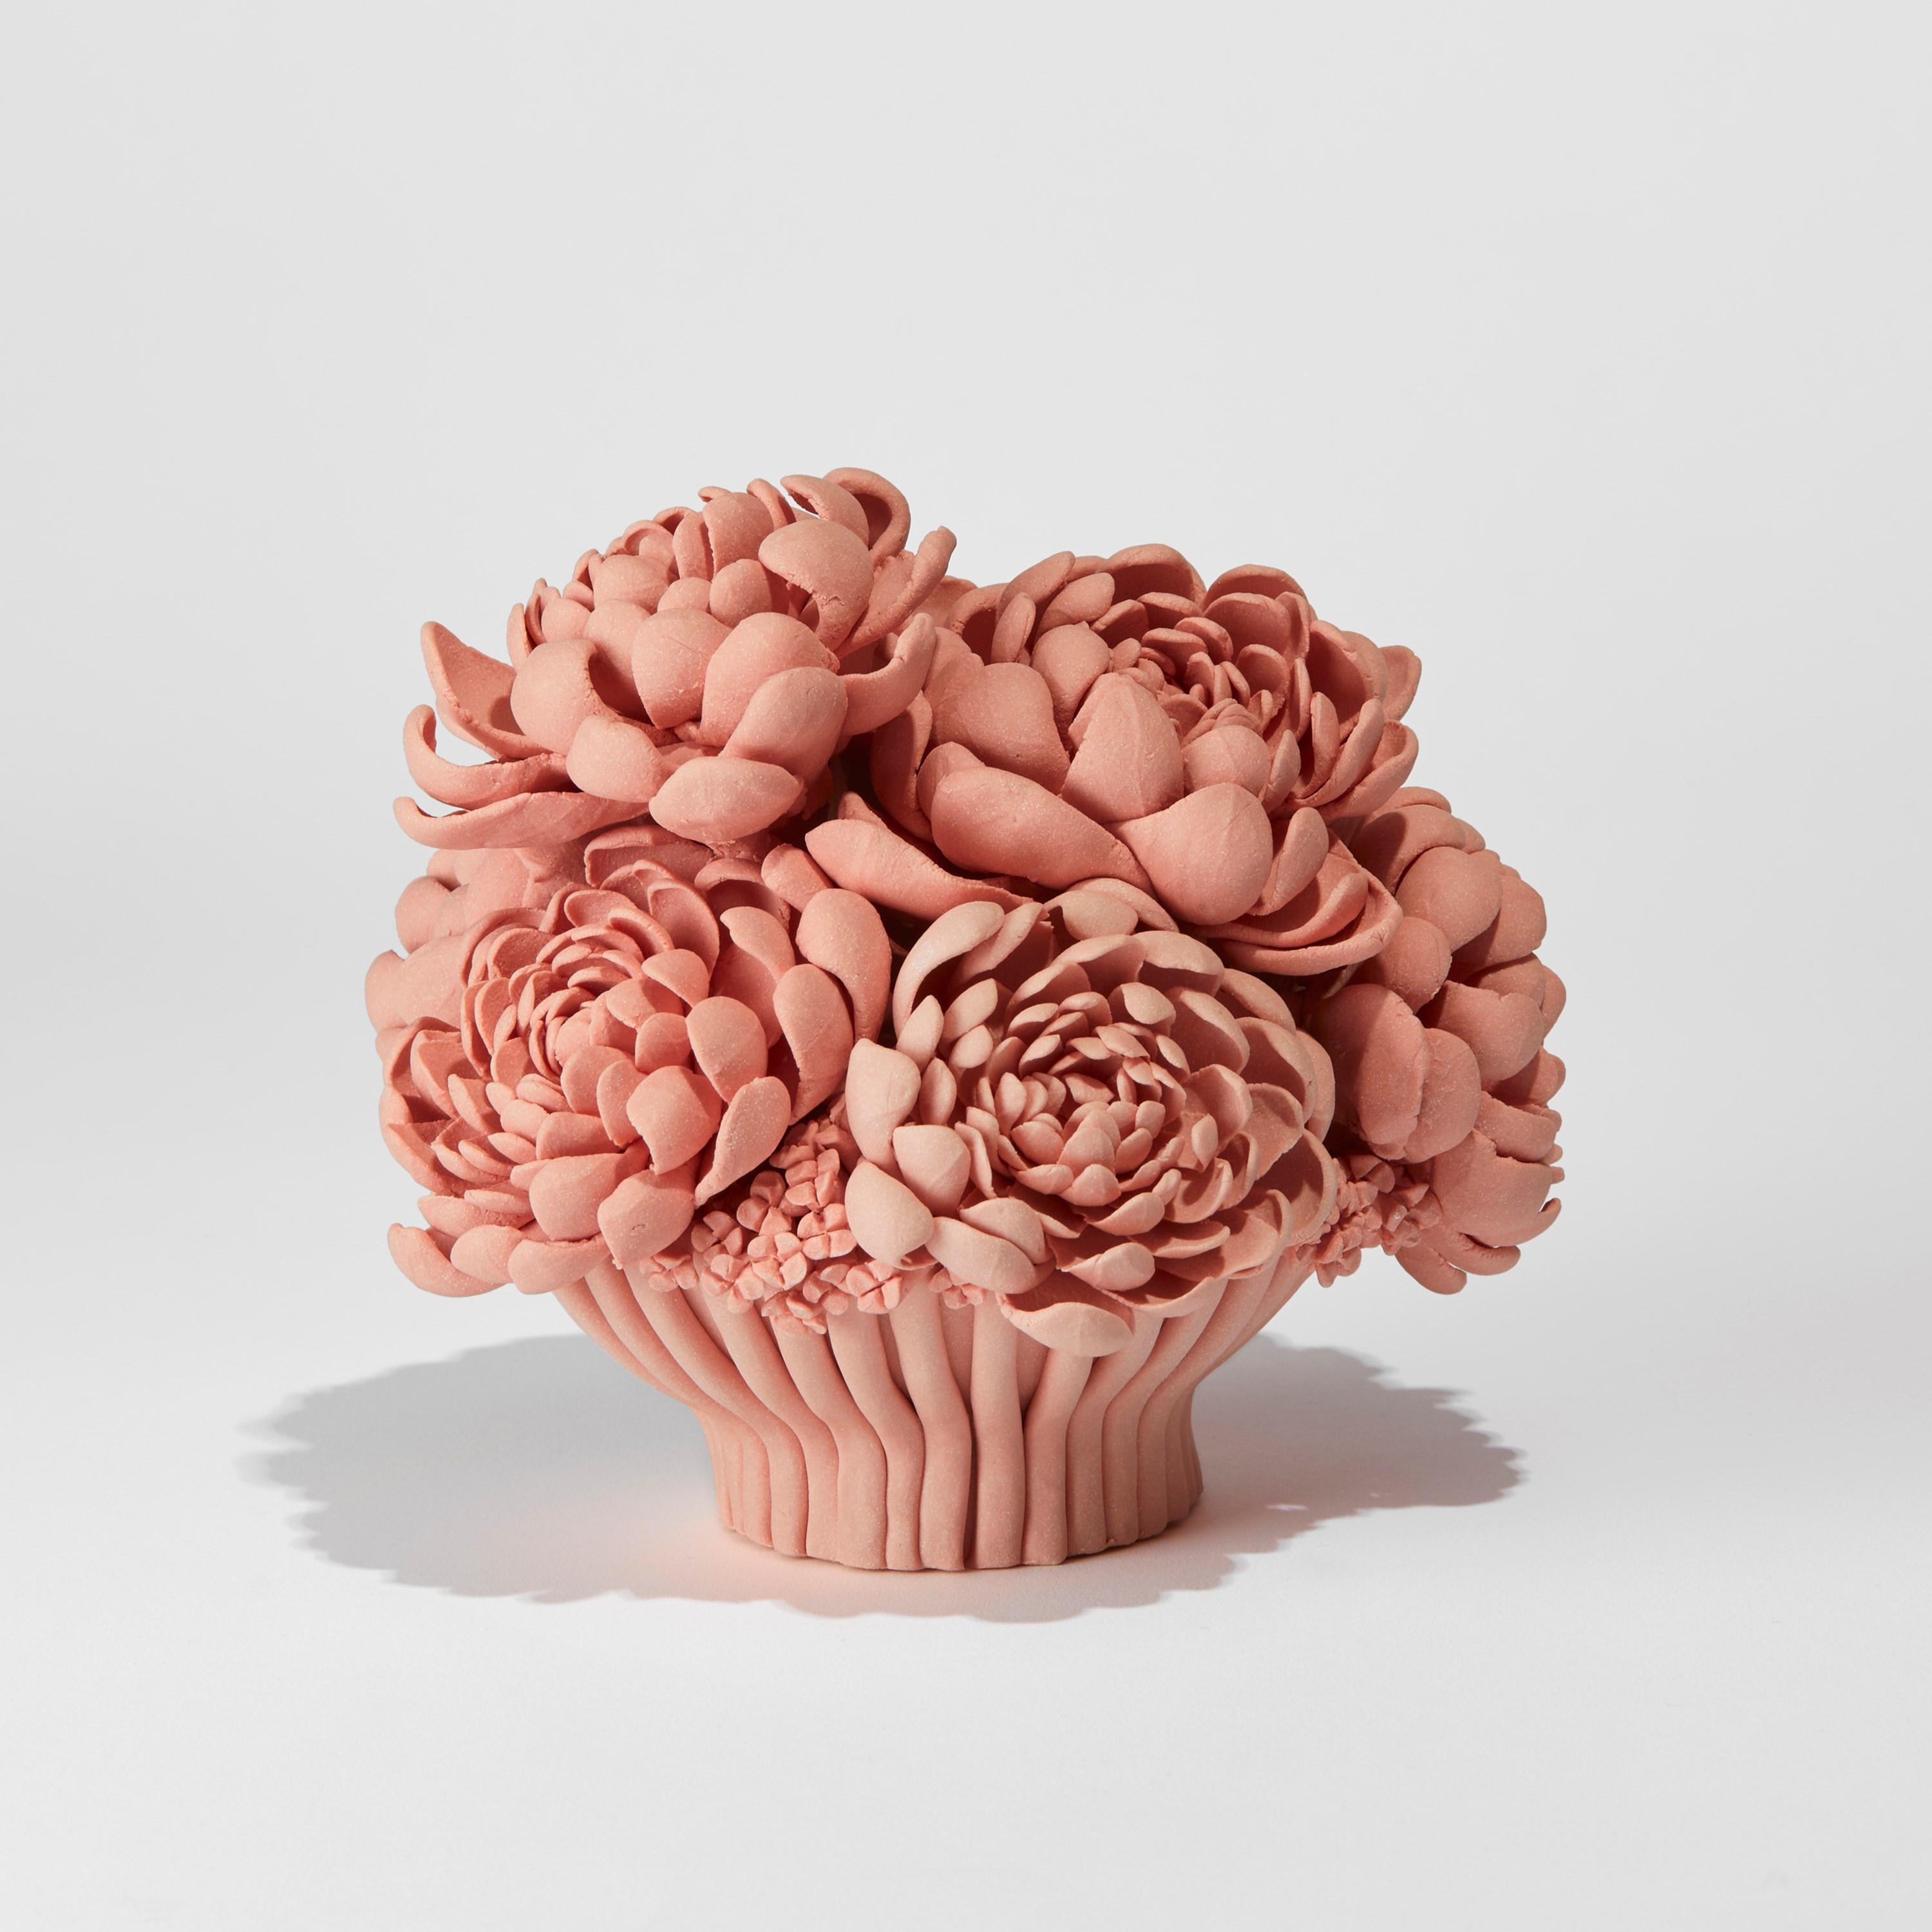 Agnes, is a unique handcrafted coral pink porcelain sculpture and centrepiece completely covered in individually made porcelain flowers of all different shapes and forms by the British artist, Vanessa Hogge.

Vanessa Hogge breathes life into her